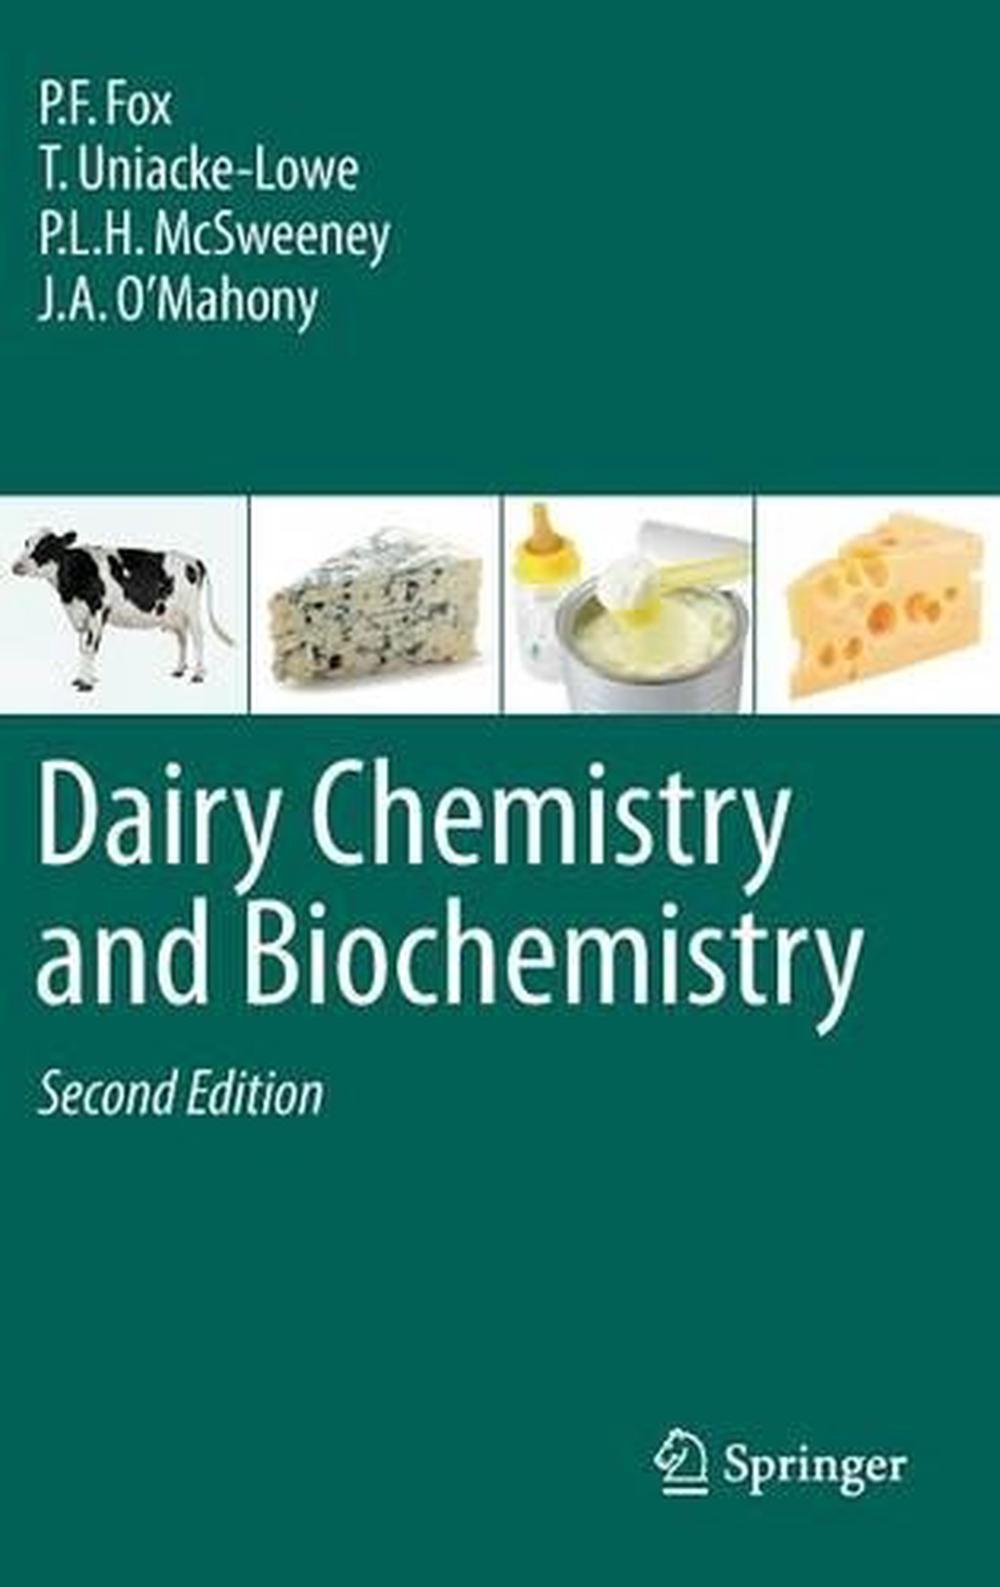 Dairy Chemistry and Biochemistry by P.F. Fox (English) Hardcover Book